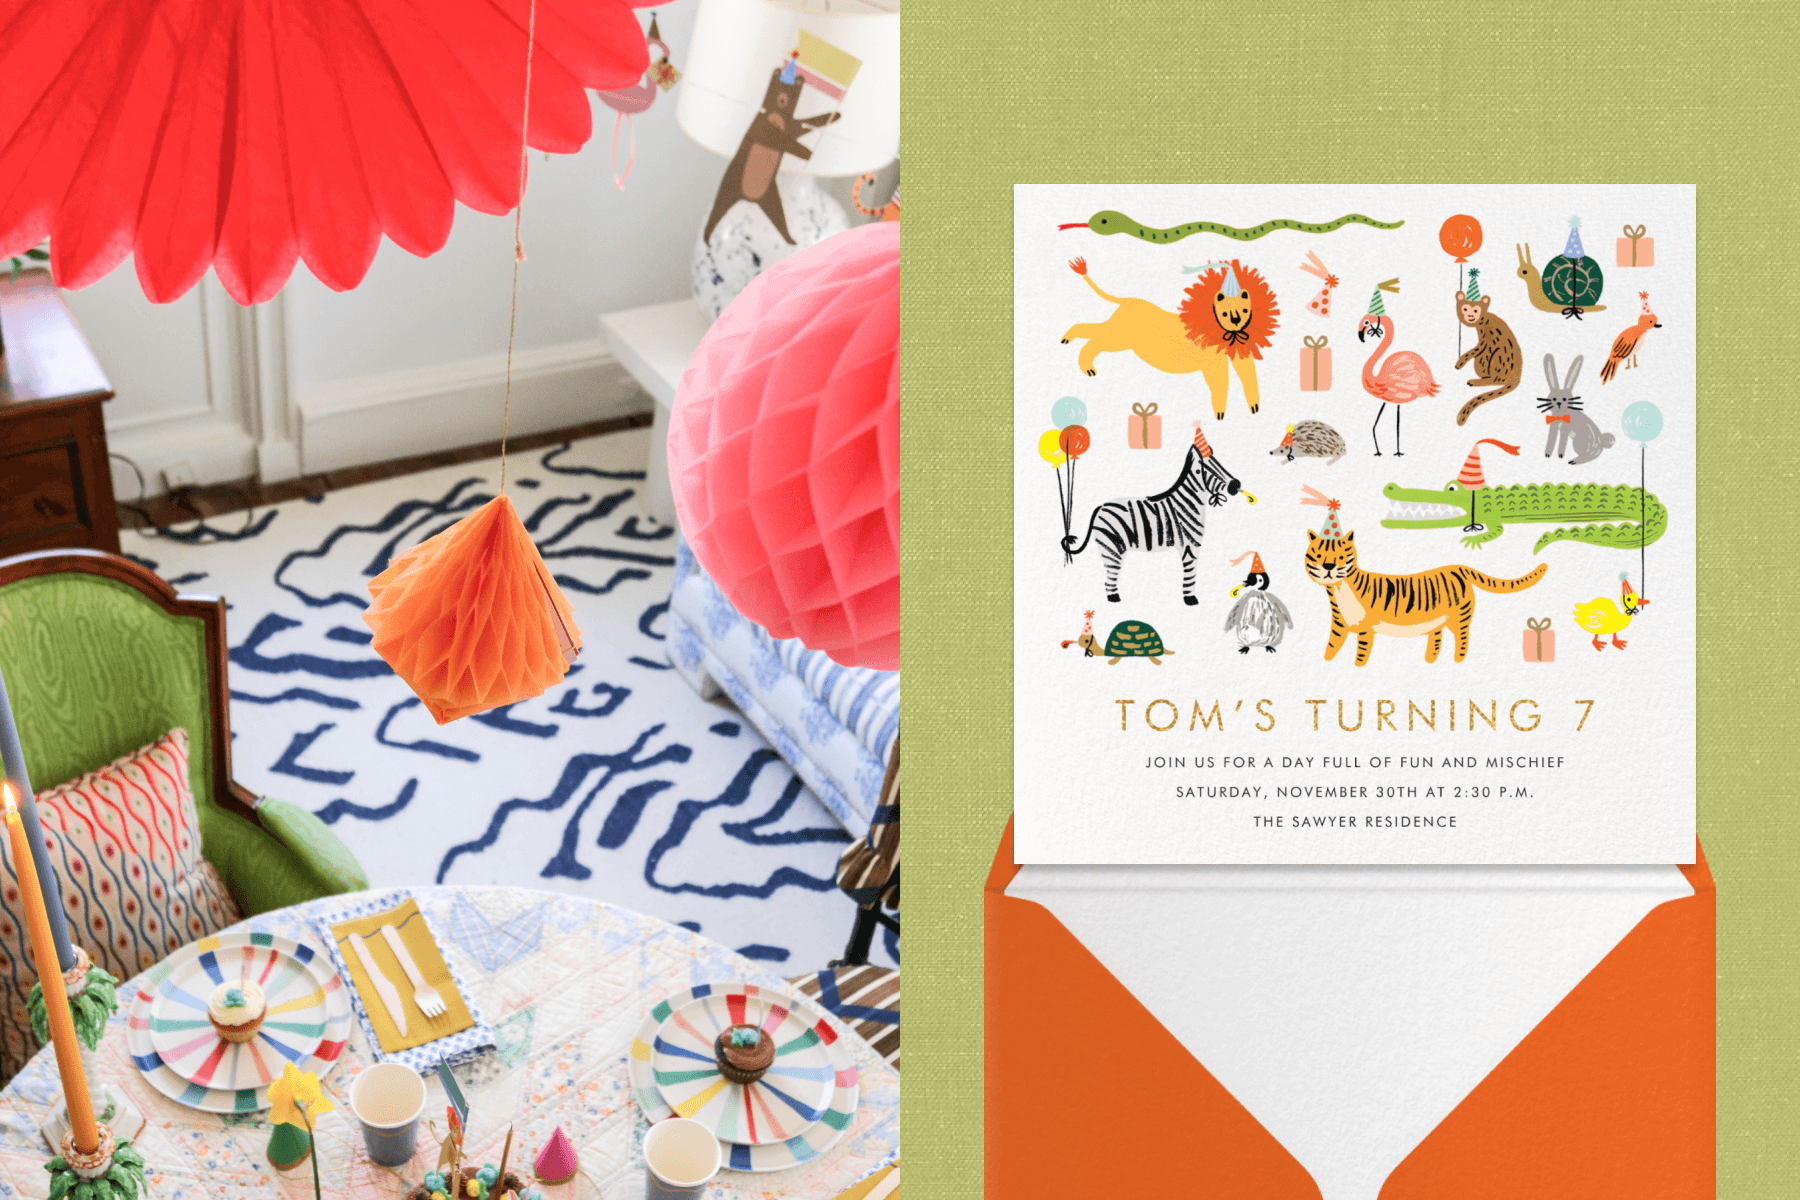 Left: View from above a kid's birthday party table set with rainbow plates. Colorful honeycomb decorations hang from the ceiling. Right: Animal-themed kids' birthday party invitation coming out of an orange envelope. 